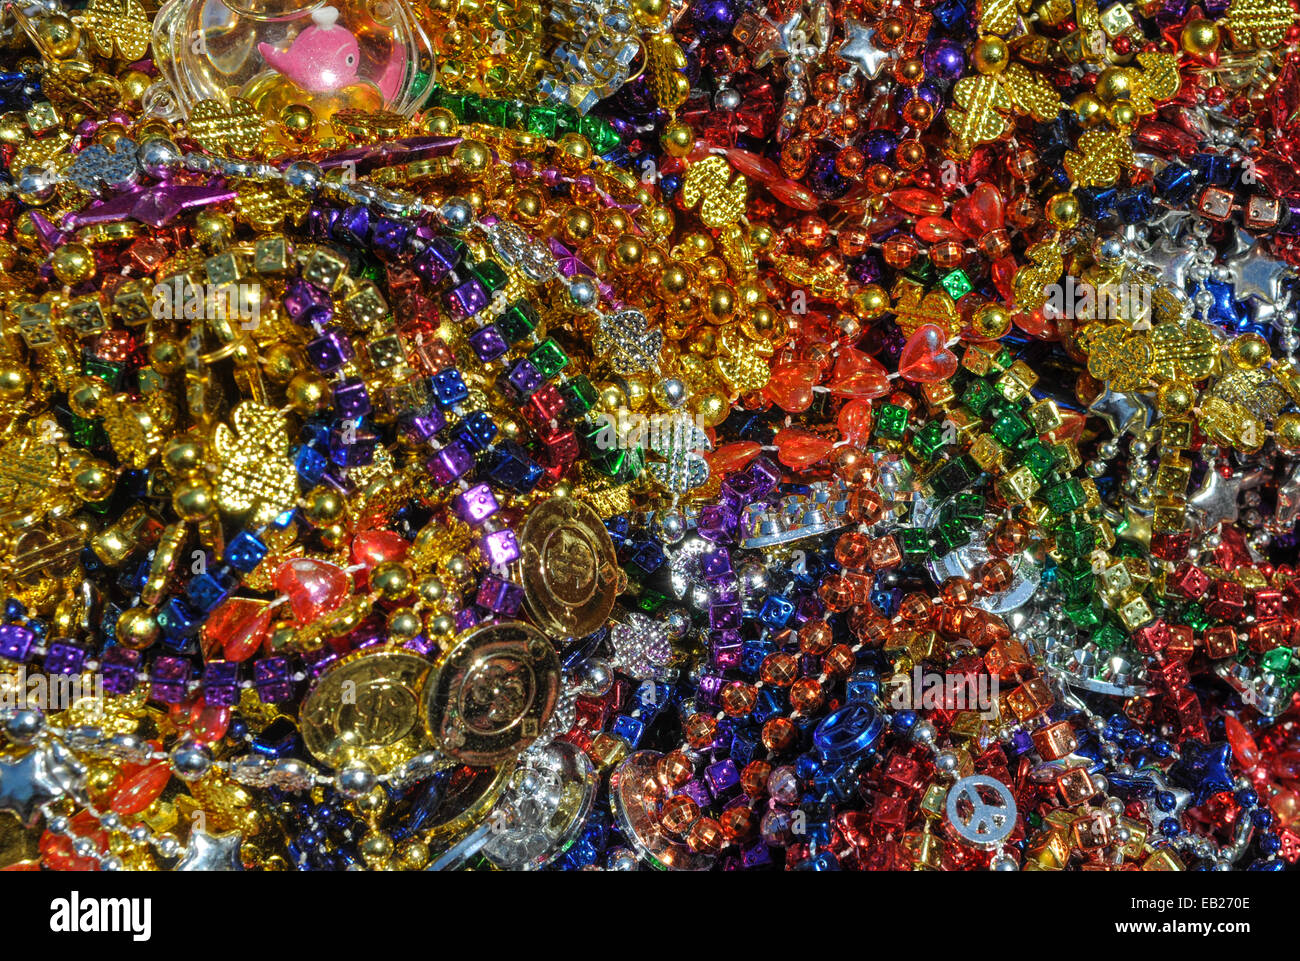 Background made up of mulit-colored including gold, purple, blue, green and pink mardi gras beads Stock Photo